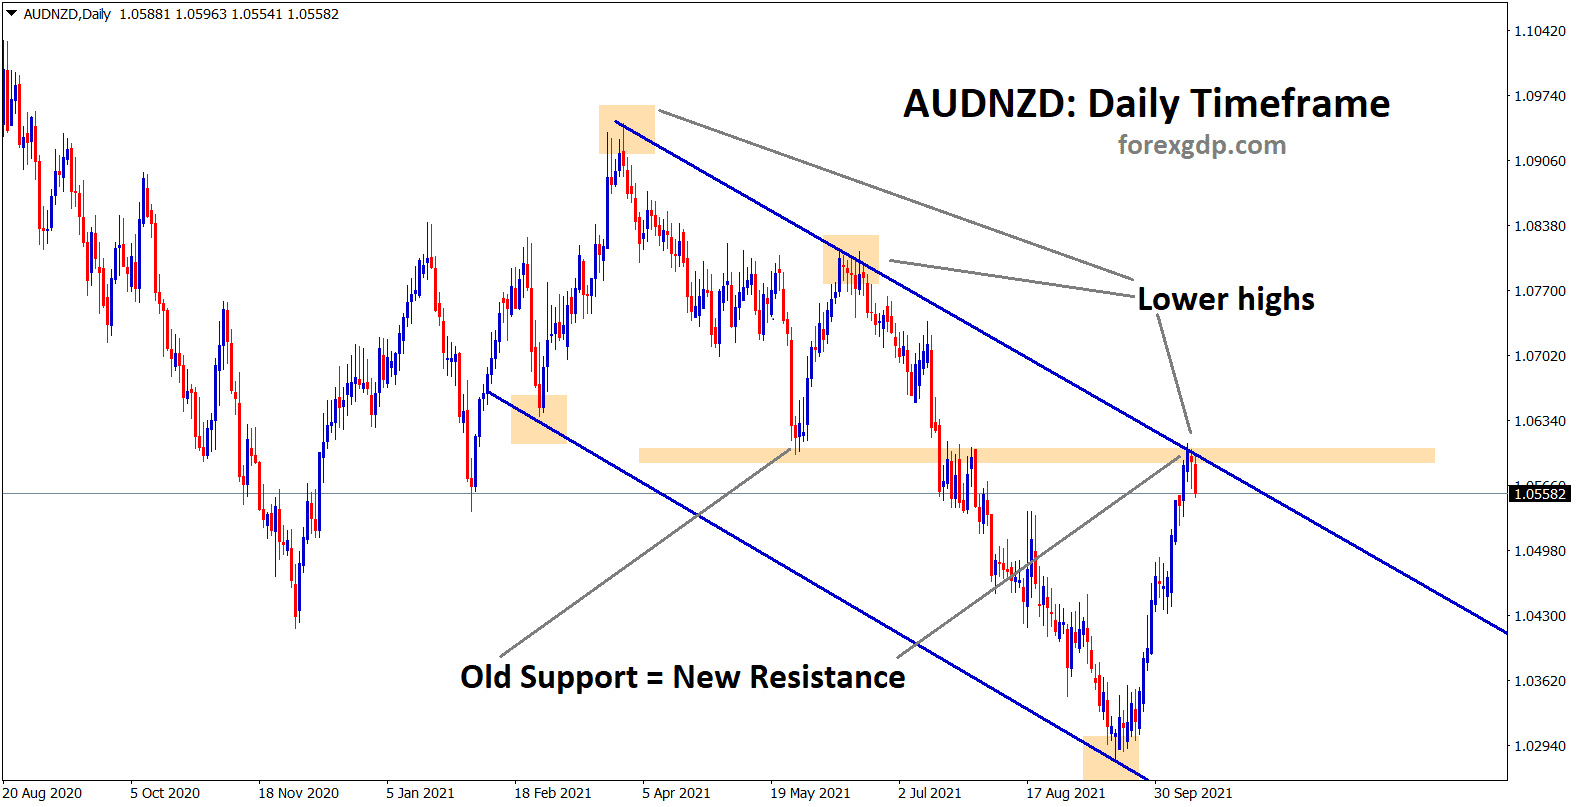 AUDNZD is making a correction from the lower high and the old support which act as new resistance